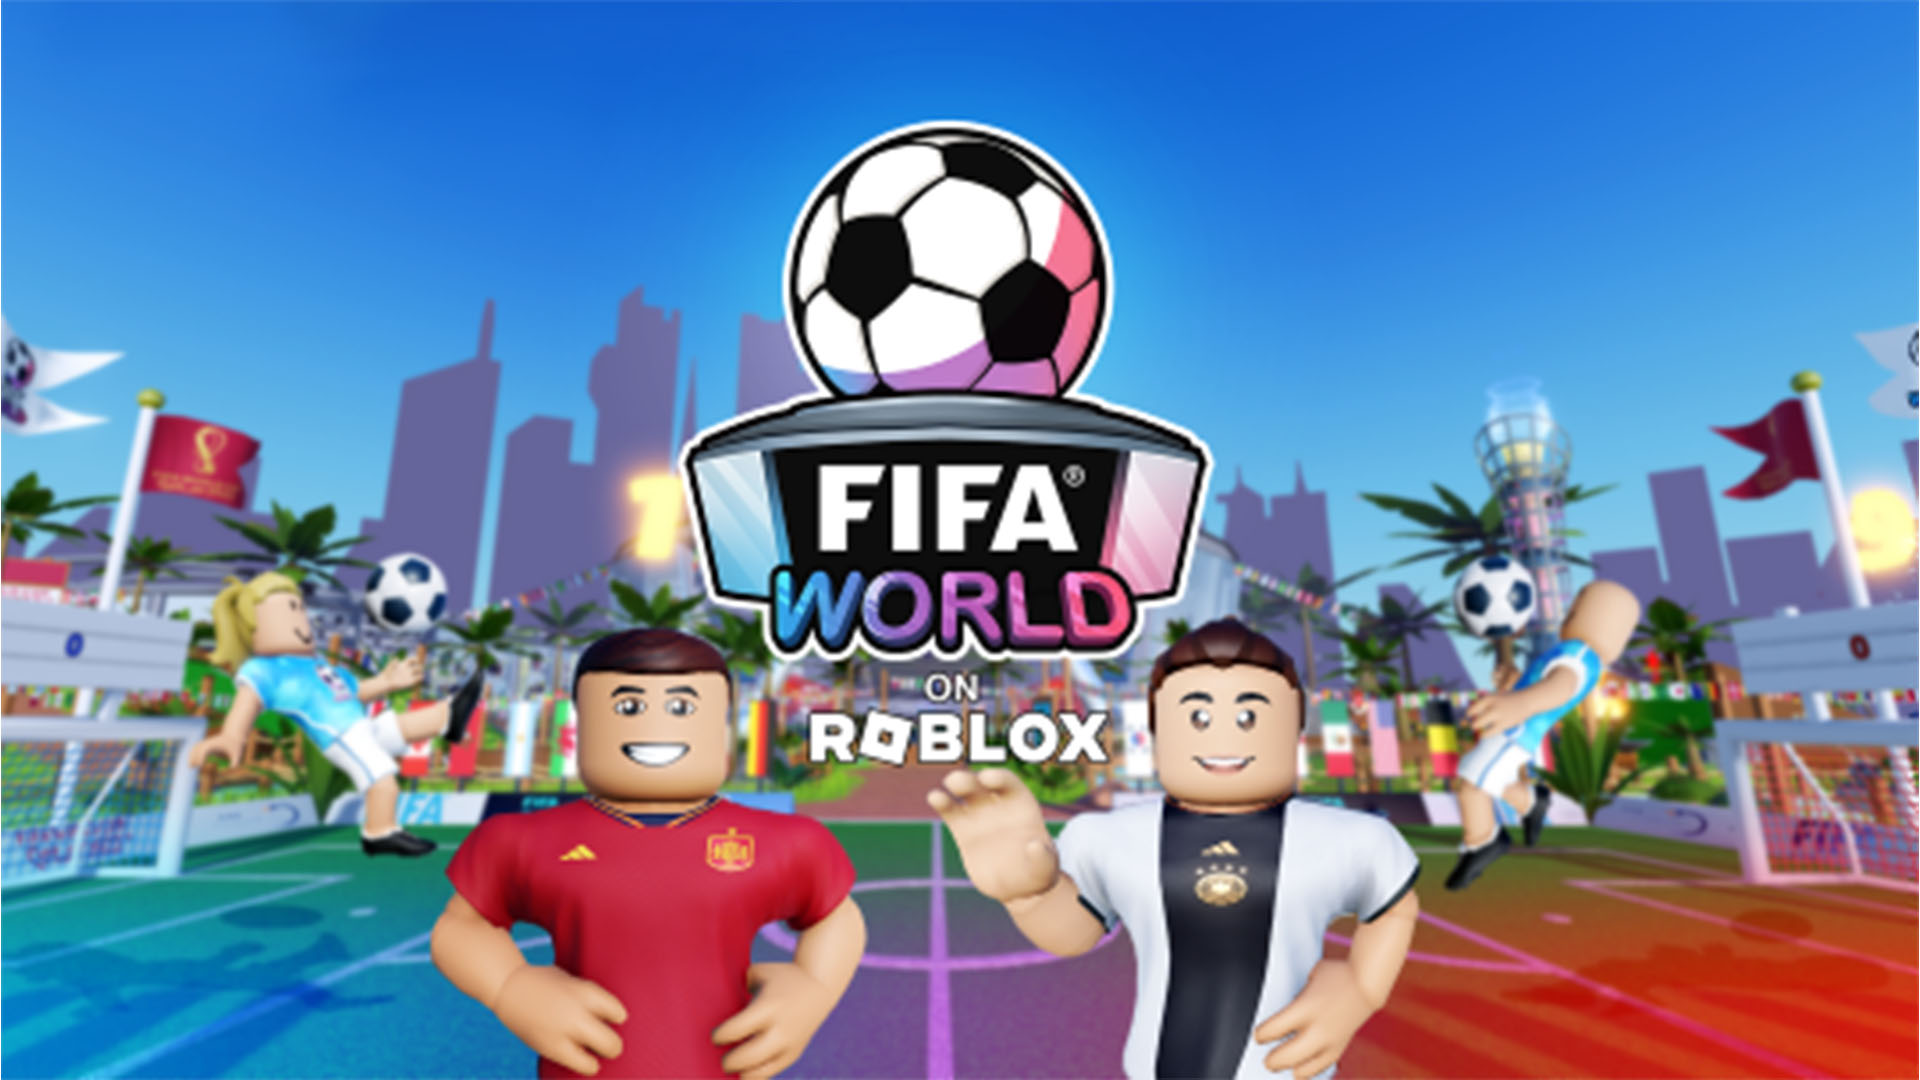 Download & Run FIFA+  Your Home for Football on PC & Mac